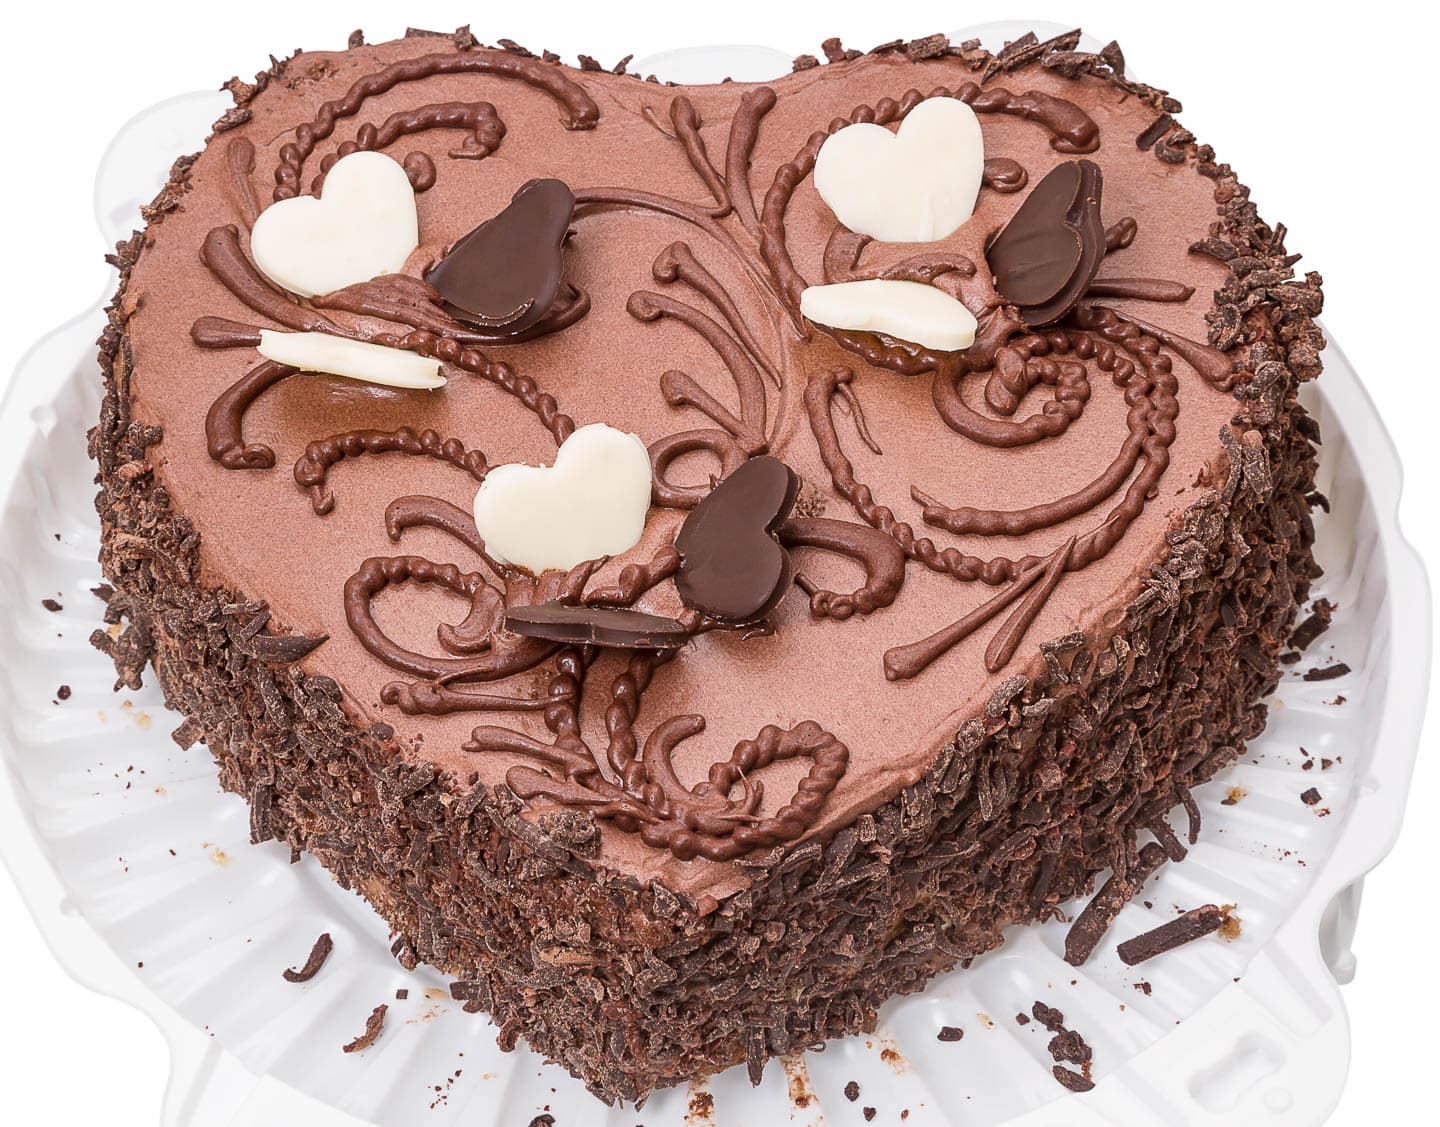 chocolate heart cake with swirl icing decorations